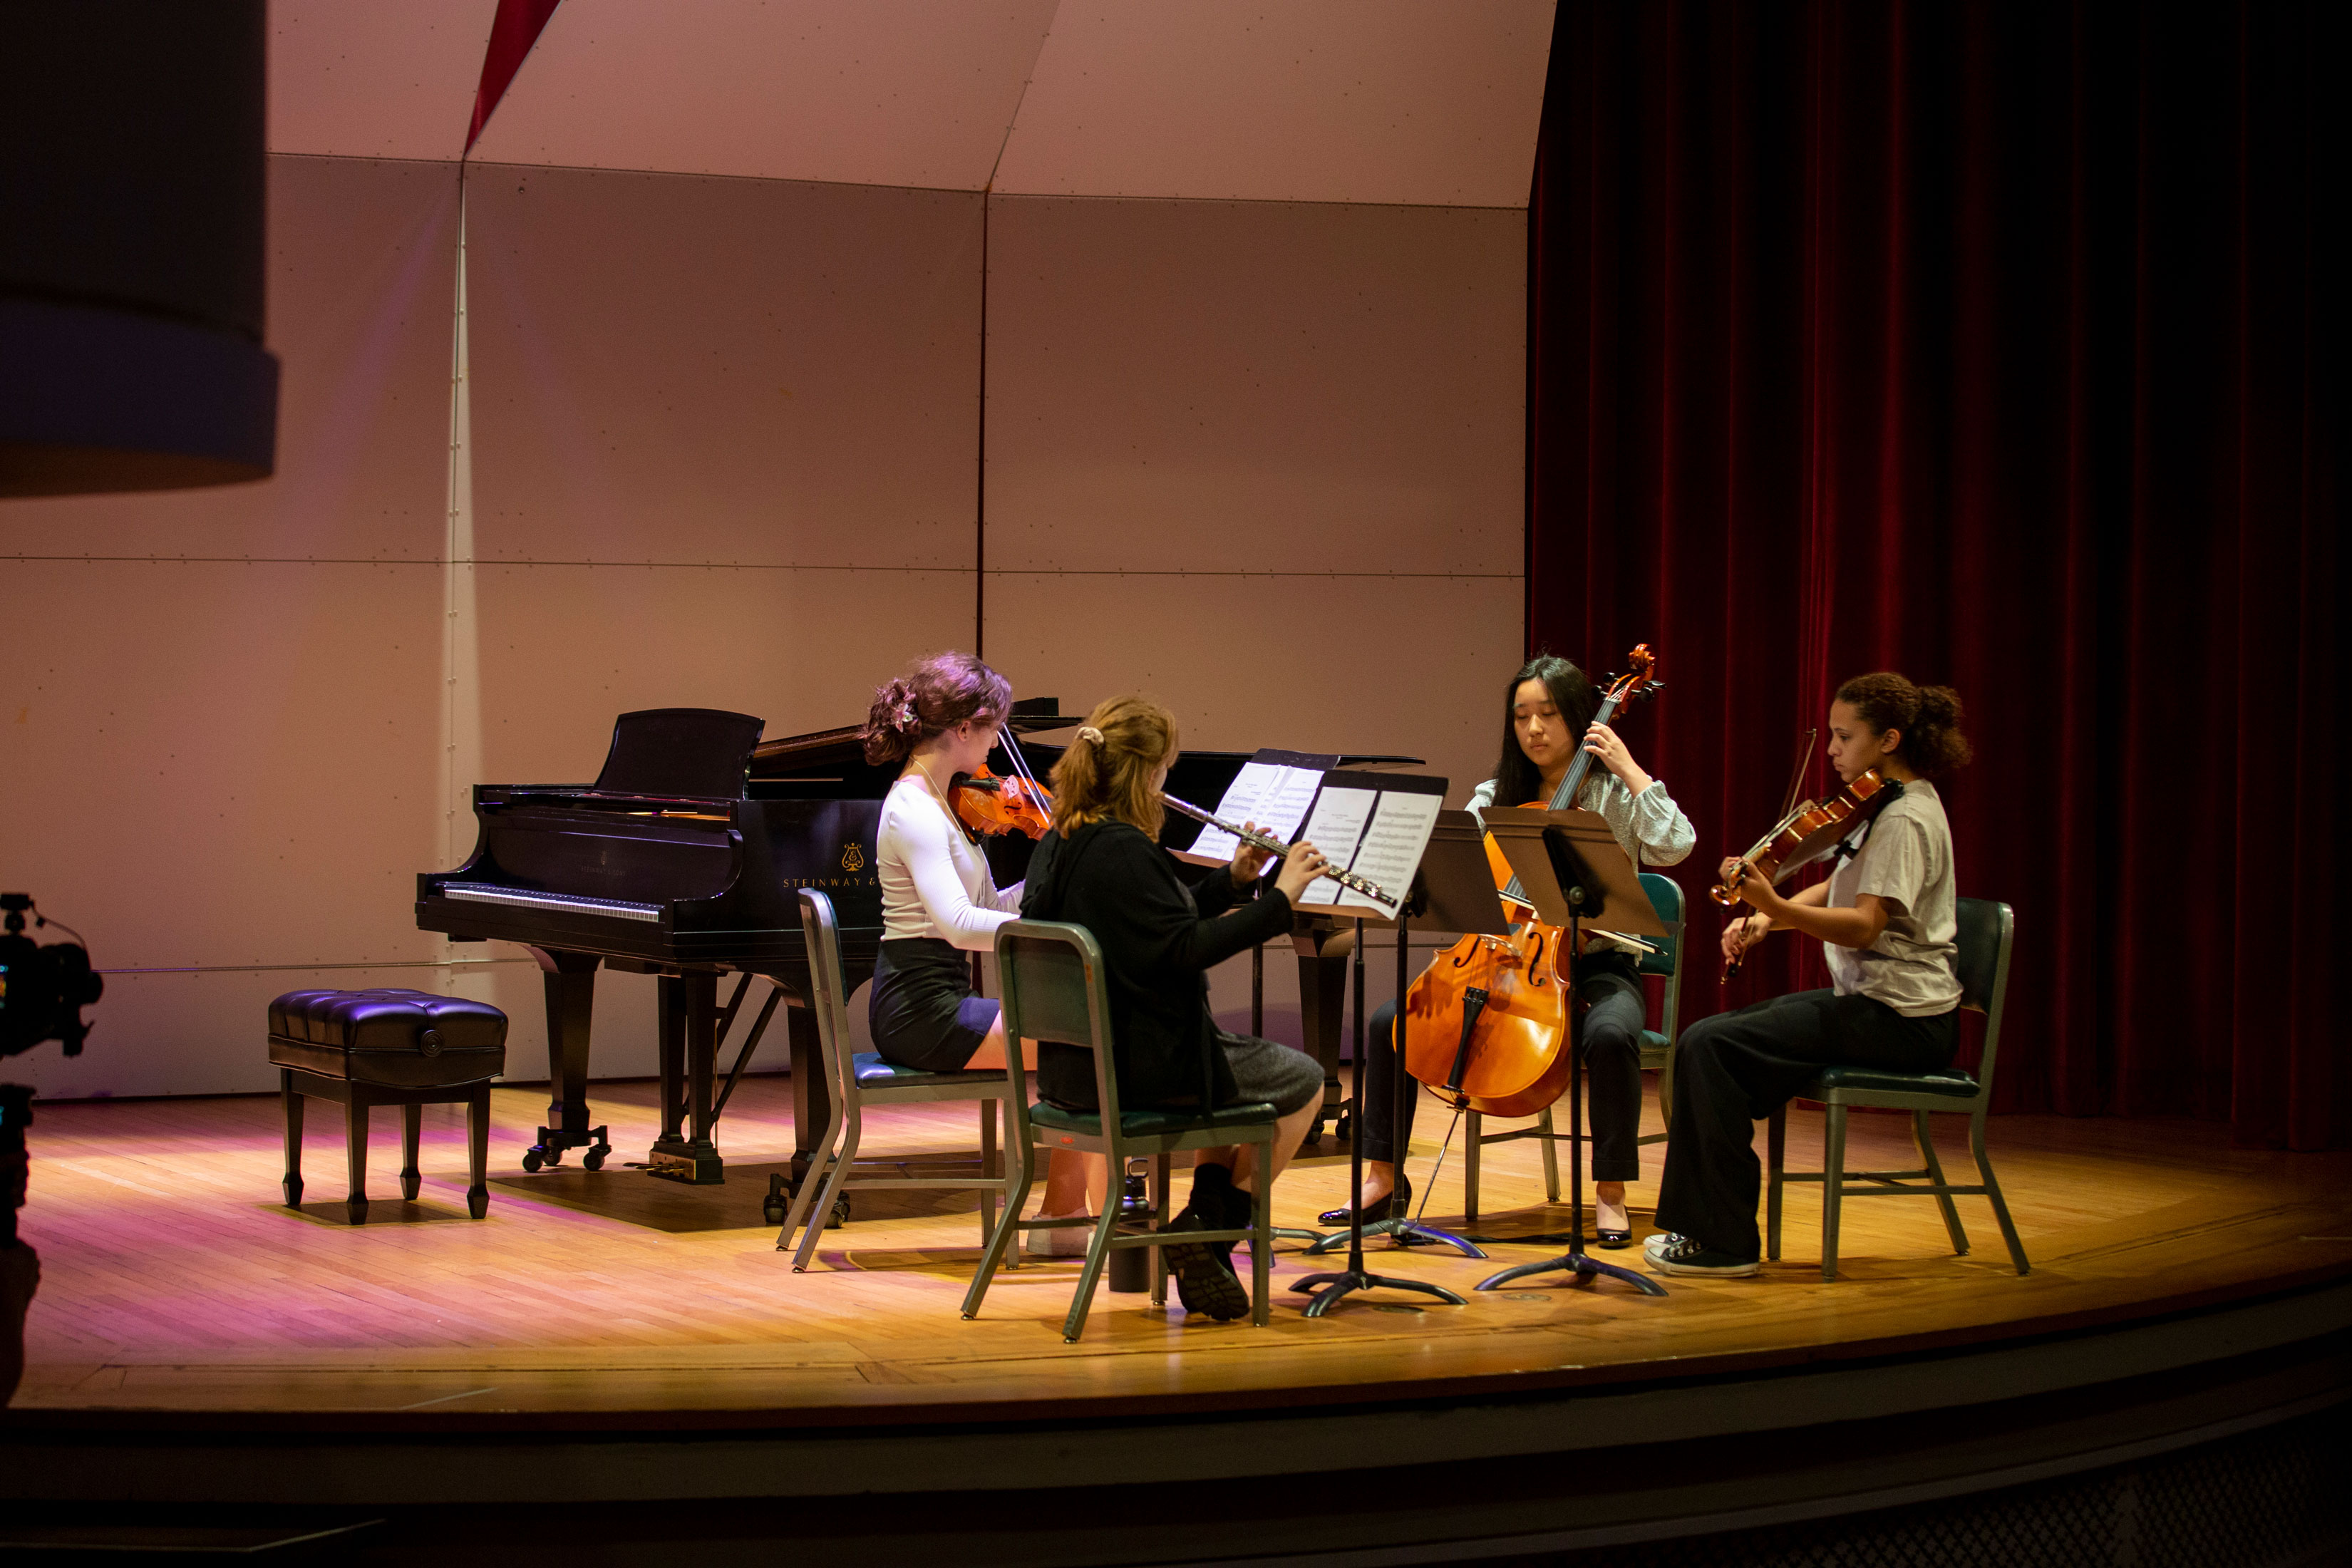 Four students, three with string instruments and one with a woodwind, sit on stage performing music.